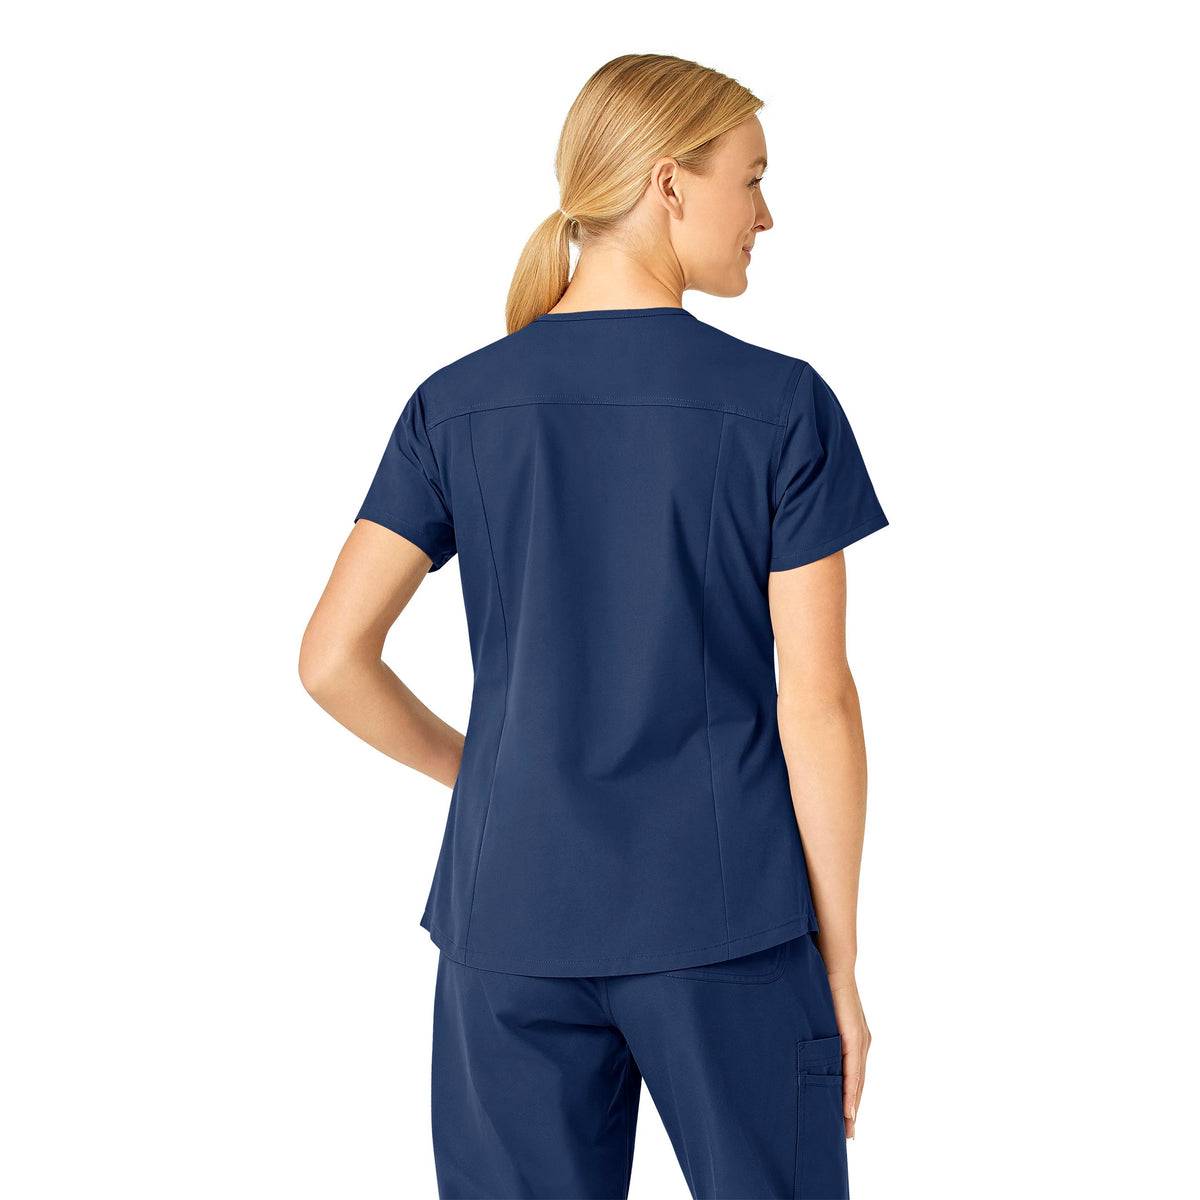 Force Essentials Women's V-Neck Scrub Top Navy back view